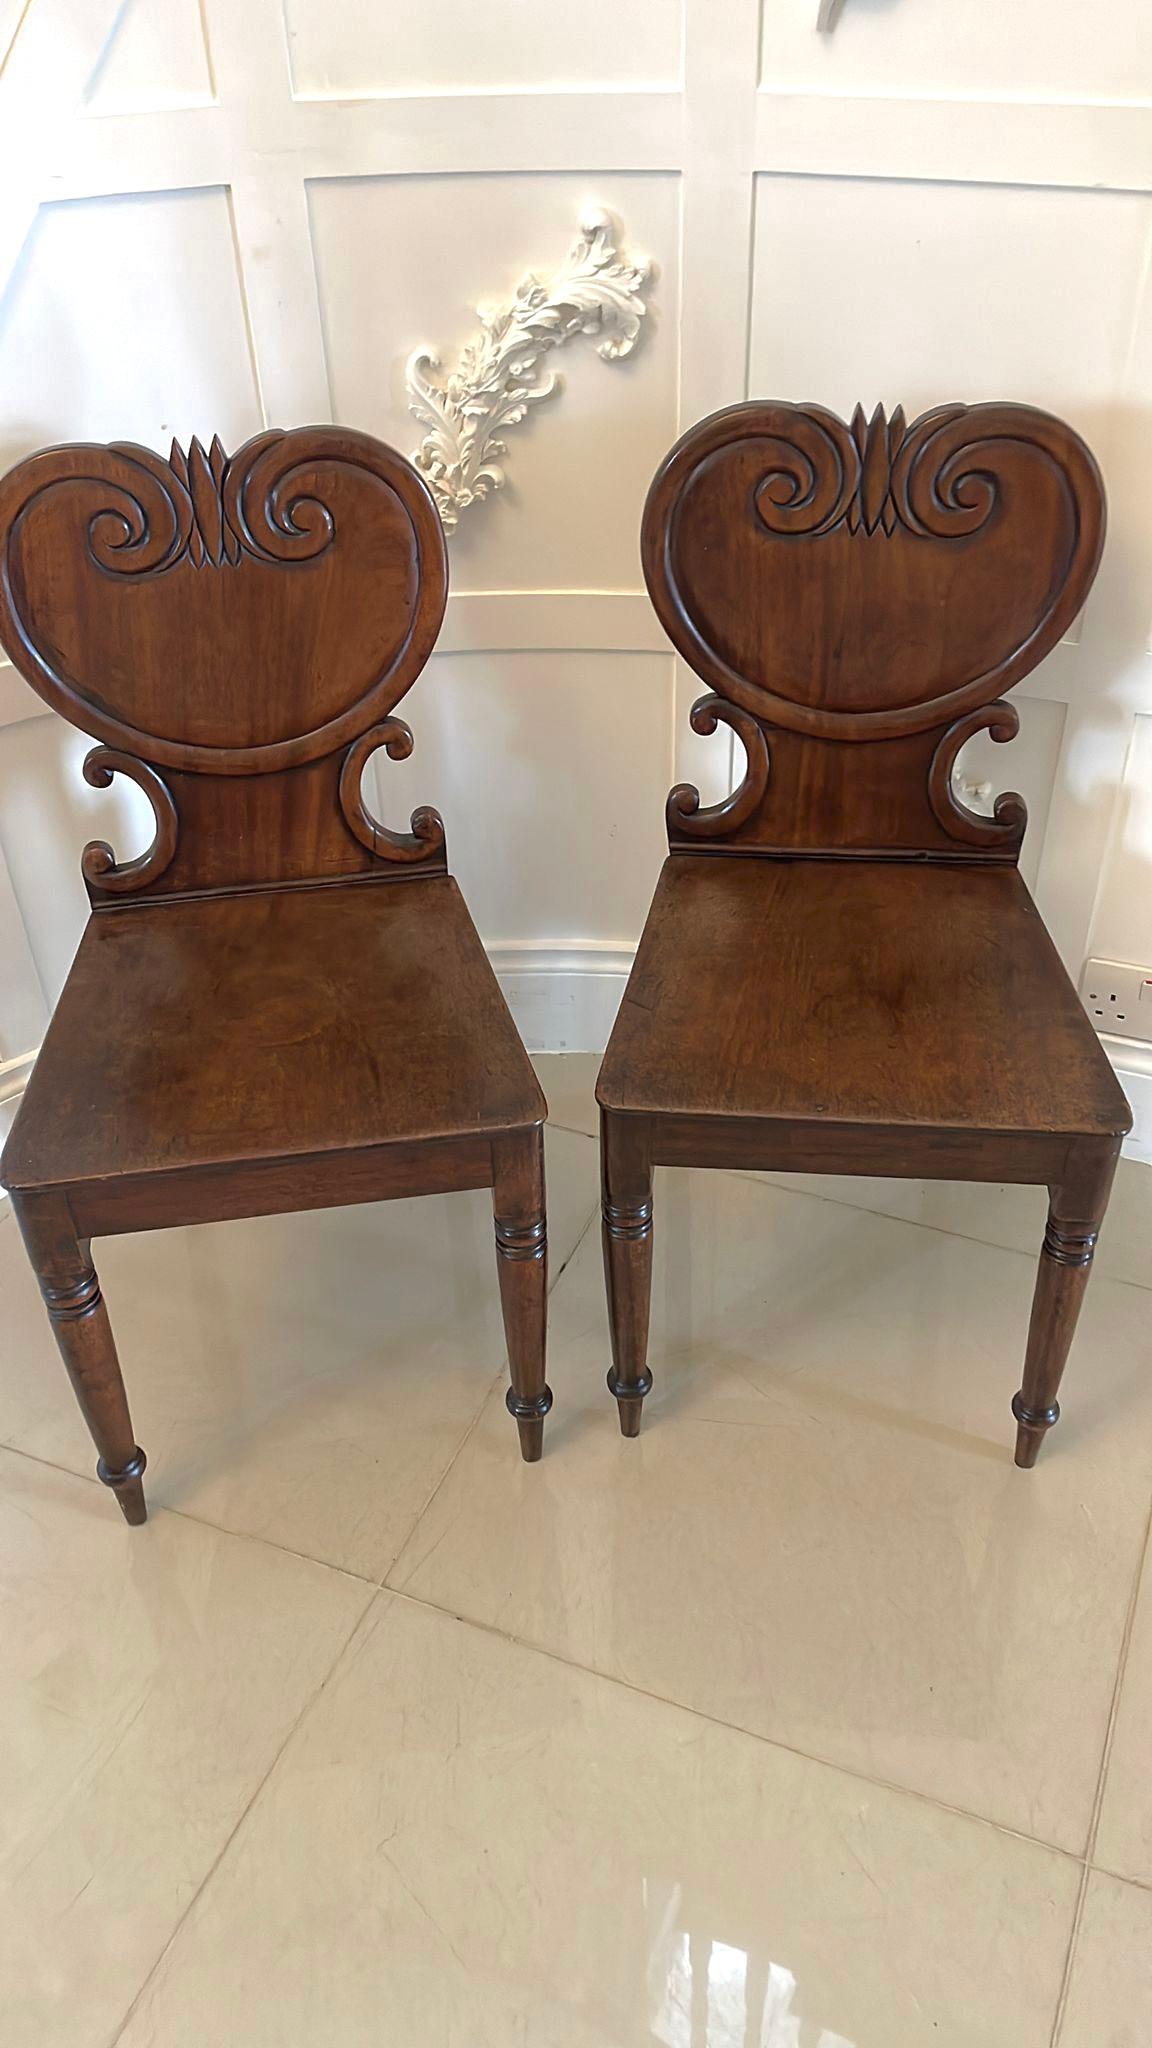 Pair of antique George III quality mahogany hall chairs having a quality carved mahogany scroll shaped back, solid mahogany seats standing on turned tapering legs to the front out swept back legs

A charming pair boasting a wonderful